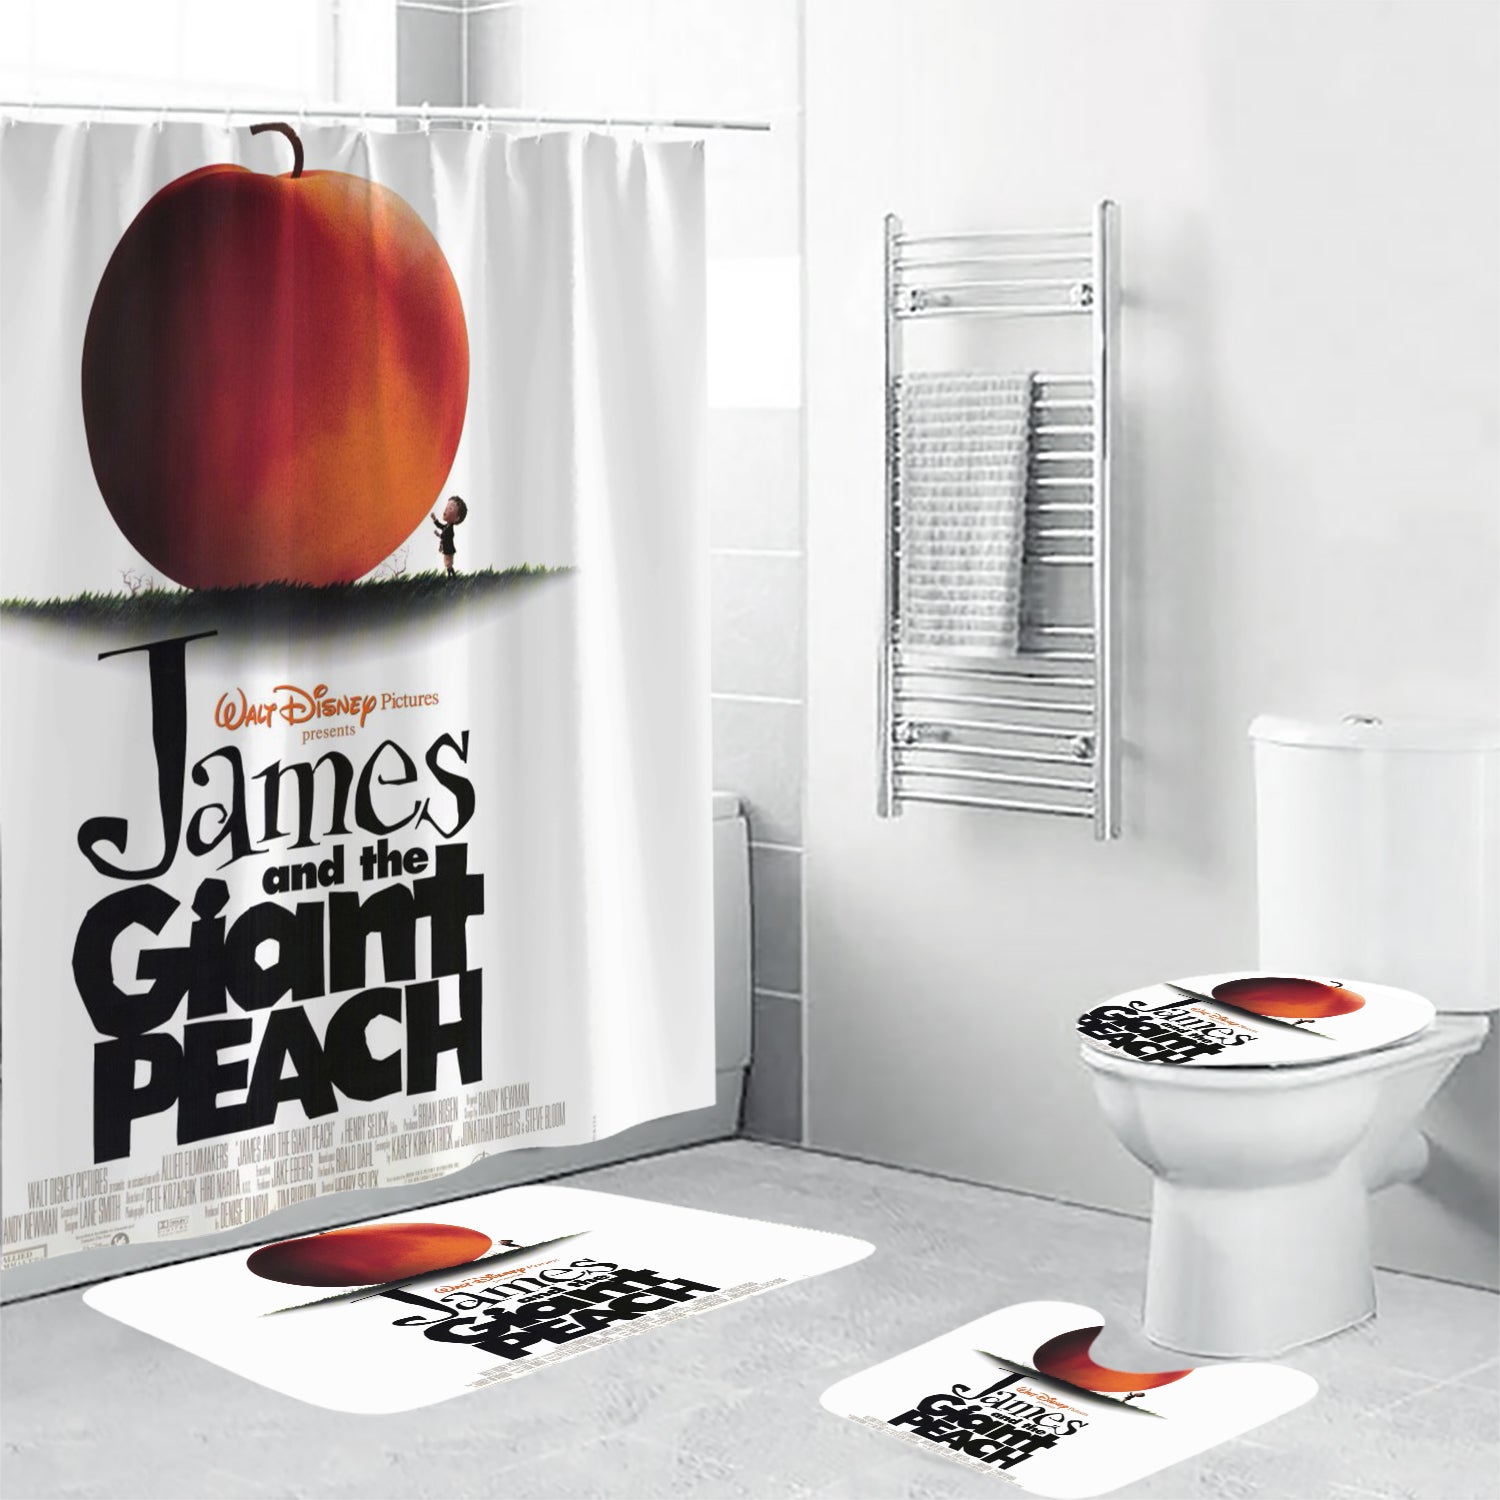 James and the Giant Peach Poster 1 4PCS Shower Curtain Non-Slip Toilet Lid Cover Bath Mat - Bathroom Set Fans Gifts